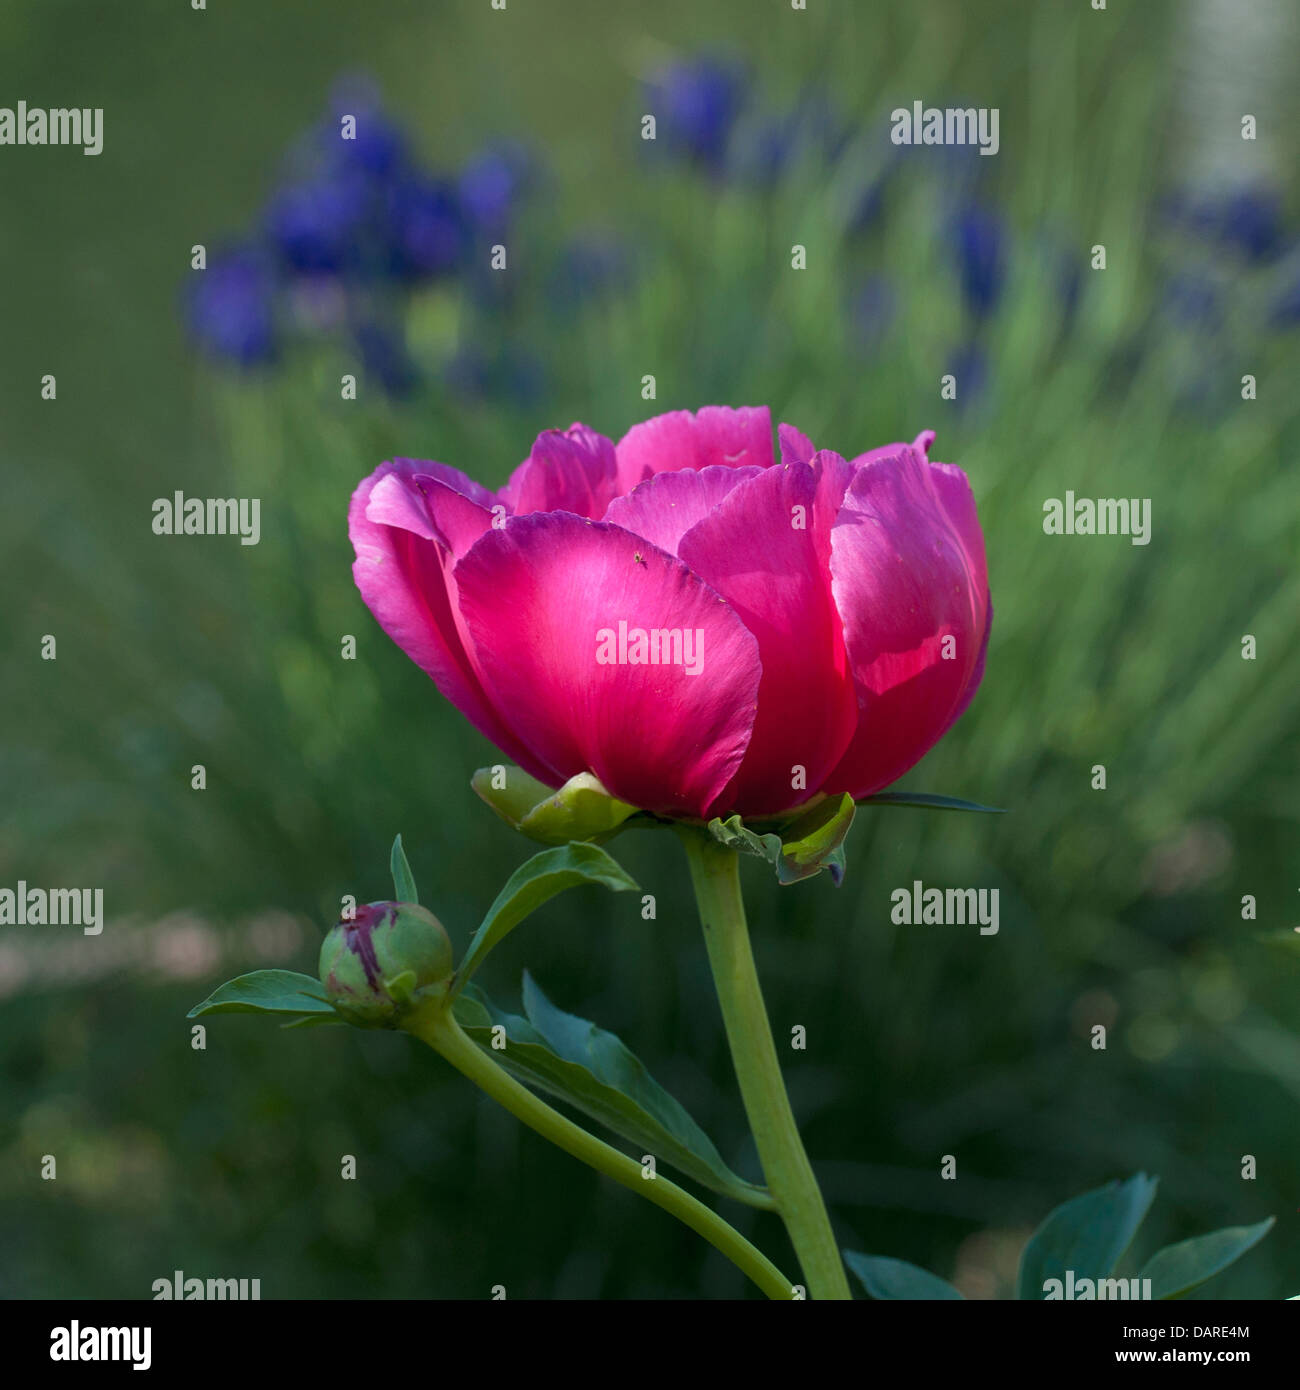 Colorful garden photograph of a vibrant pink peony flower in bloom. Stock Photo